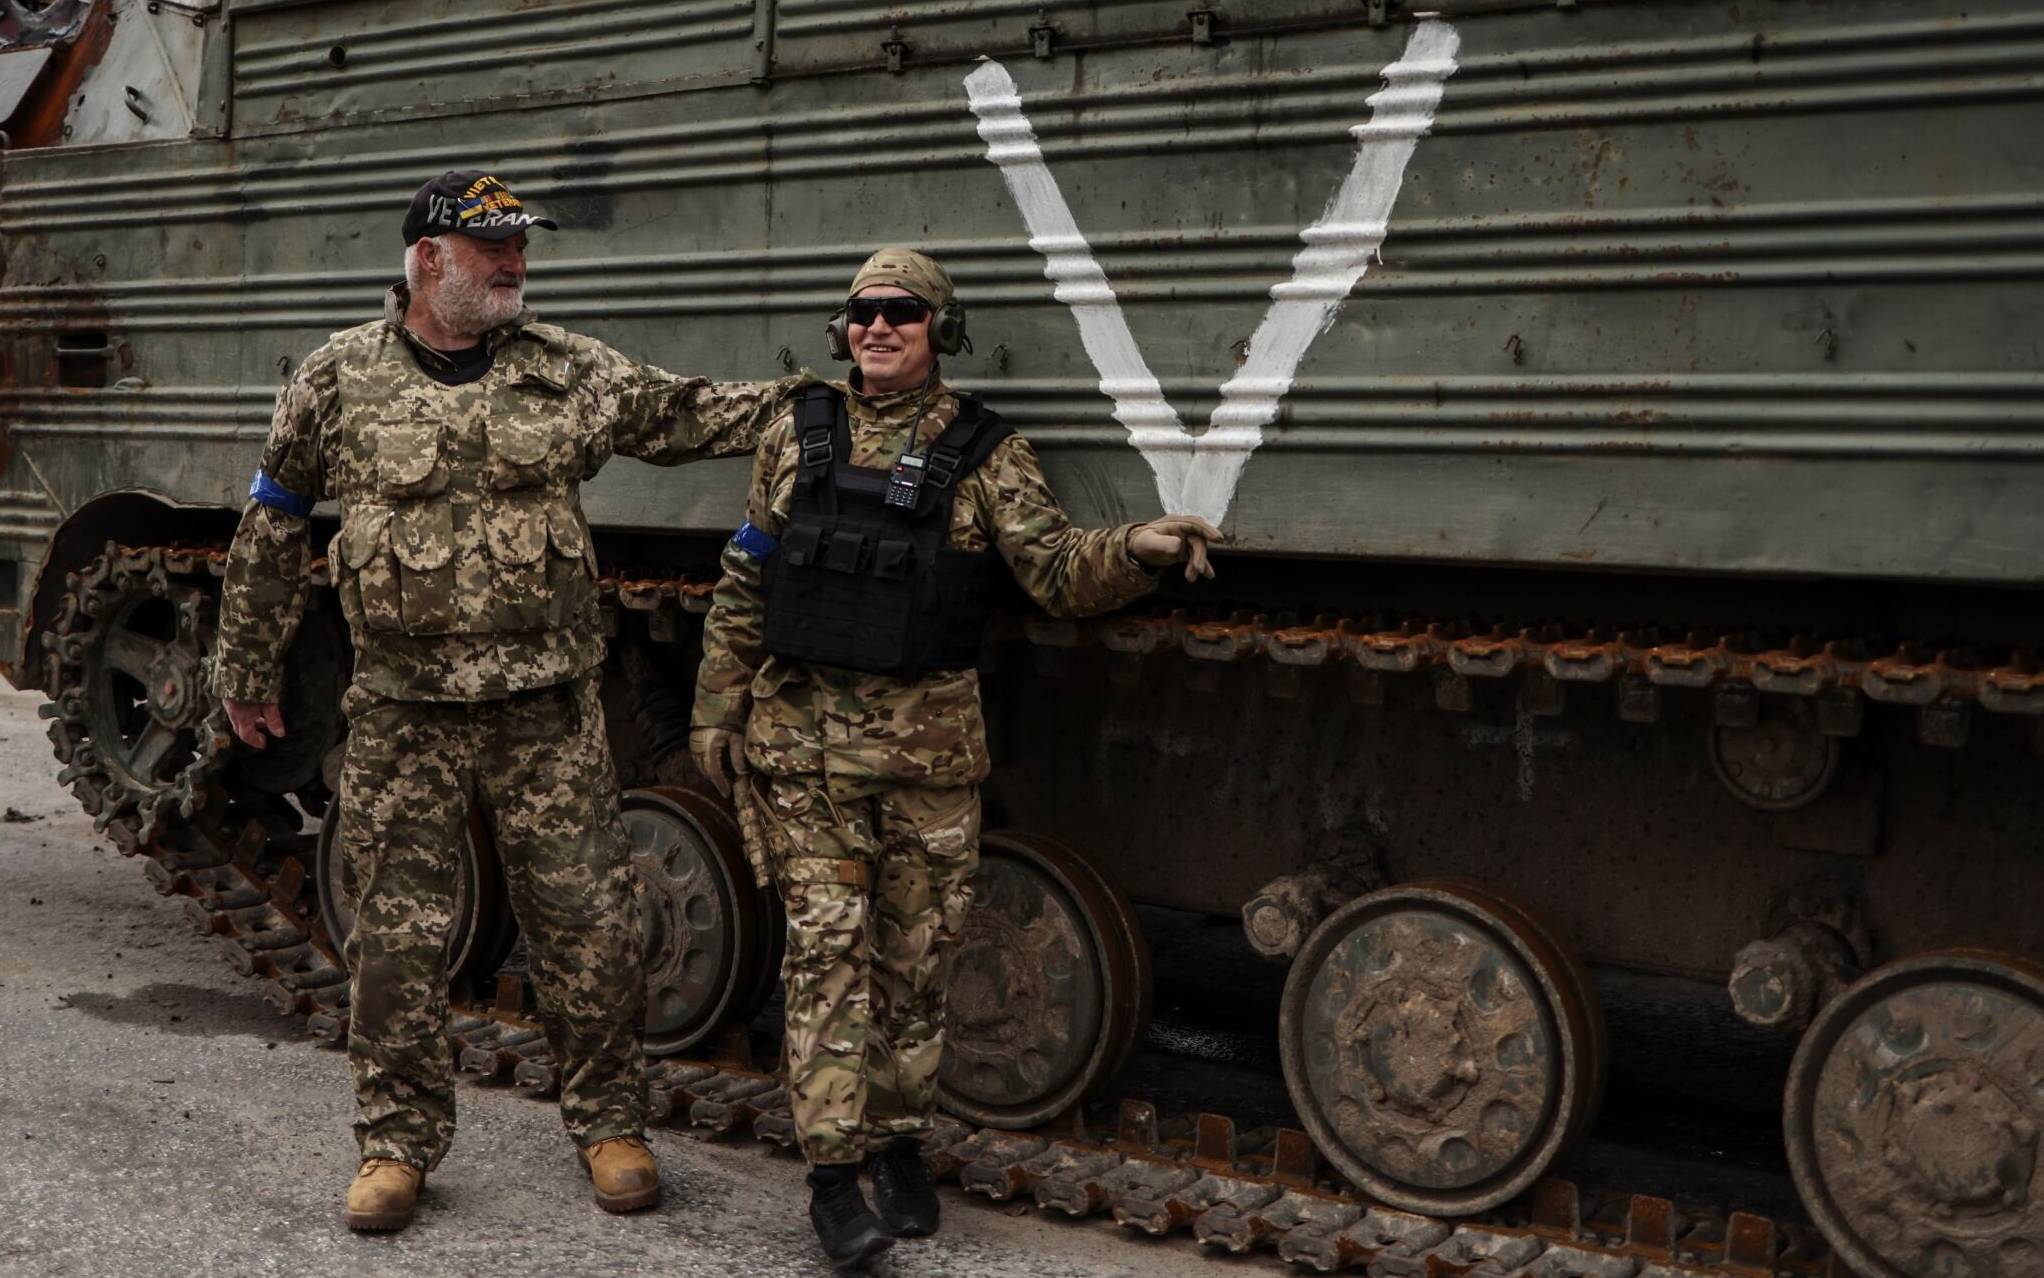 US war veteran Steven Straub (R) poses for a picture next to a member of Ukranian army as they patrol on a road near Buda-Babynetska, north of Kyiv, on April 5, 2022, days after Russian forces retreated from the area. (Photo by RONALDO SCHEMIDT / AFP)